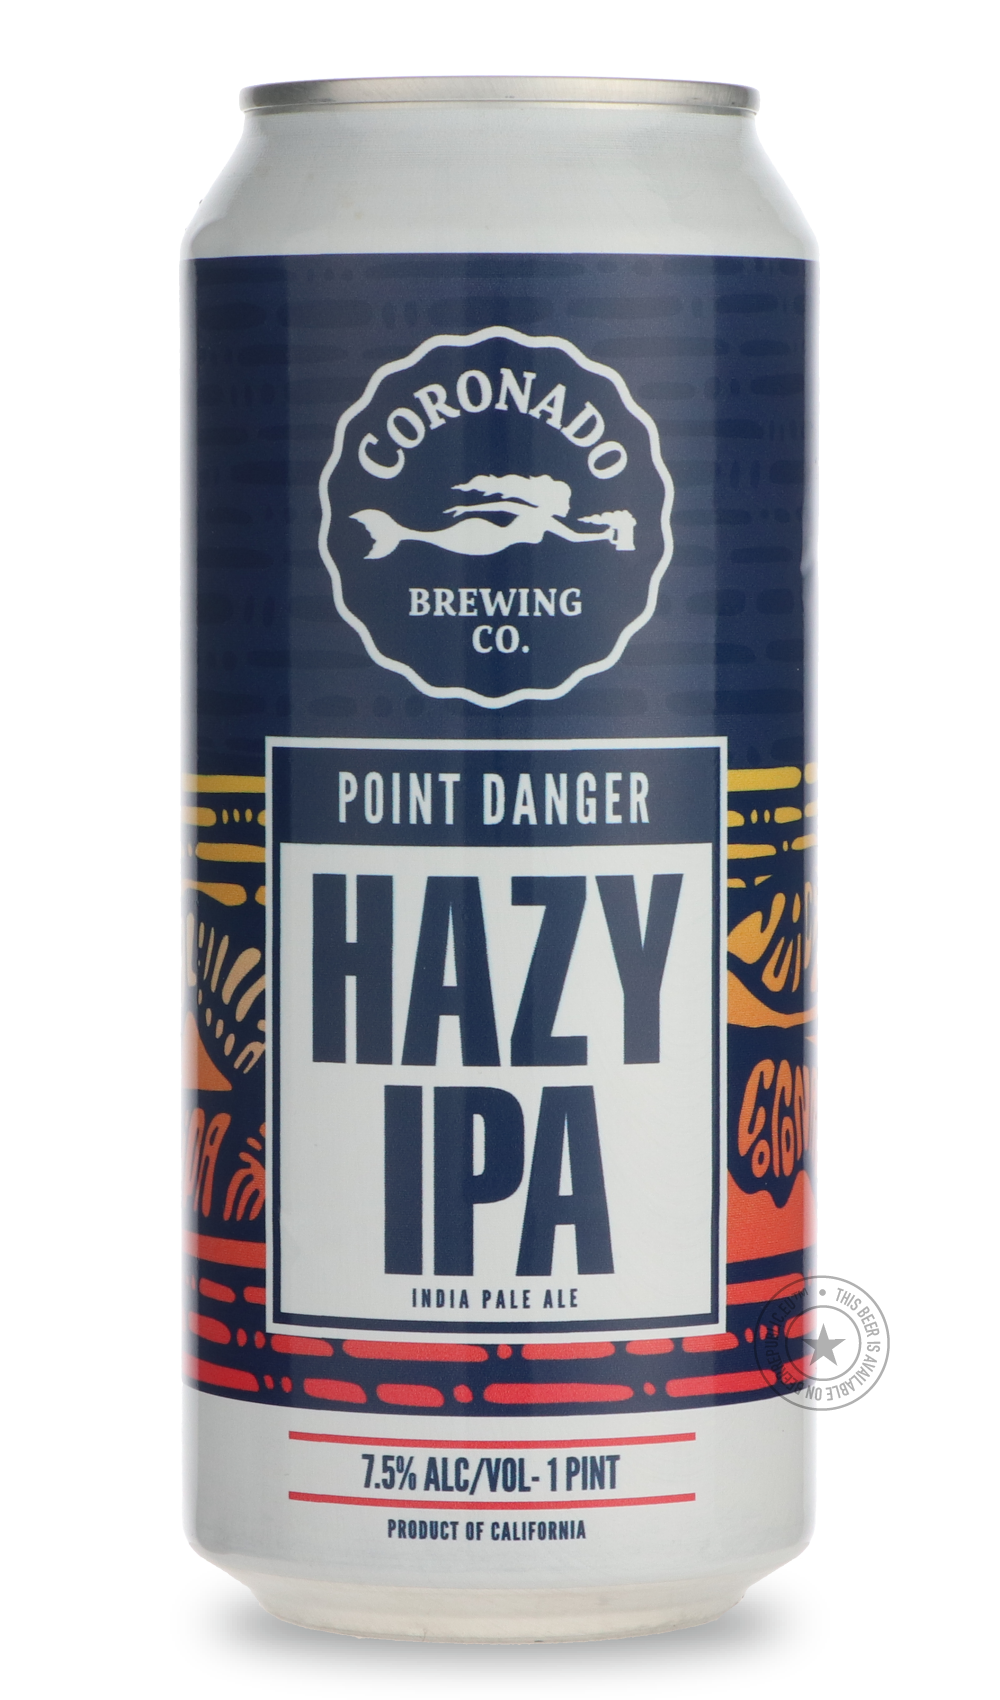 -Coronado- Point Danger-IPA- Only @ Beer Republic - The best online beer store for American & Canadian craft beer - Buy beer online from the USA and Canada - Bier online kopen - Amerikaans bier kopen - Craft beer store - Craft beer kopen - Amerikanisch bier kaufen - Bier online kaufen - Acheter biere online - IPA - Stout - Porter - New England IPA - Hazy IPA - Imperial Stout - Barrel Aged - Barrel Aged Imperial Stout - Brown - Dark beer - Blond - Blonde - Pilsner - Lager - Wheat - Weizen - Amber - Barley Wi